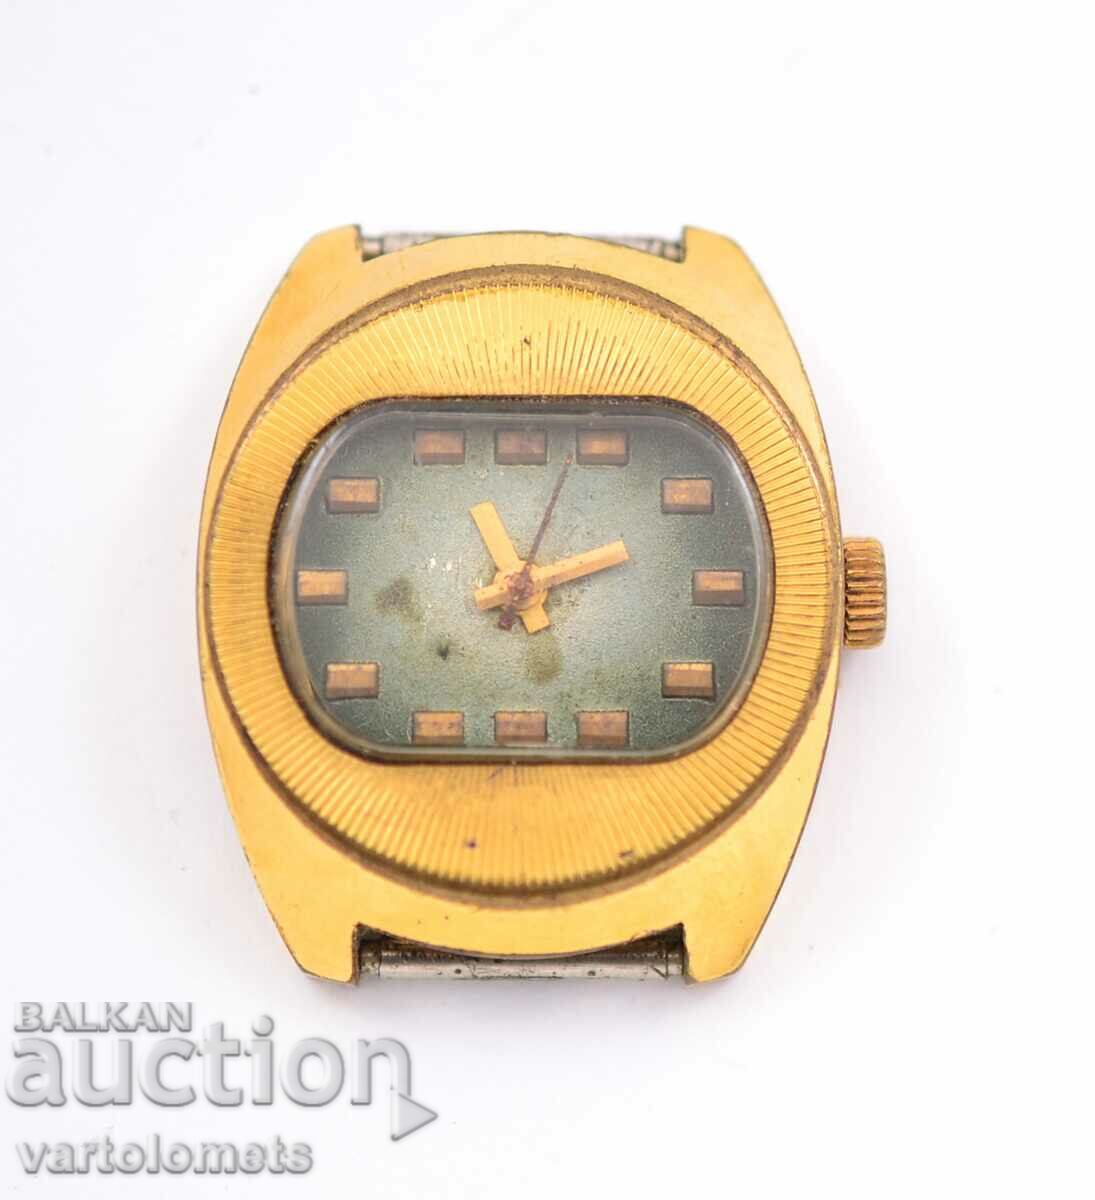 USSR Russian watch with gold plating - works